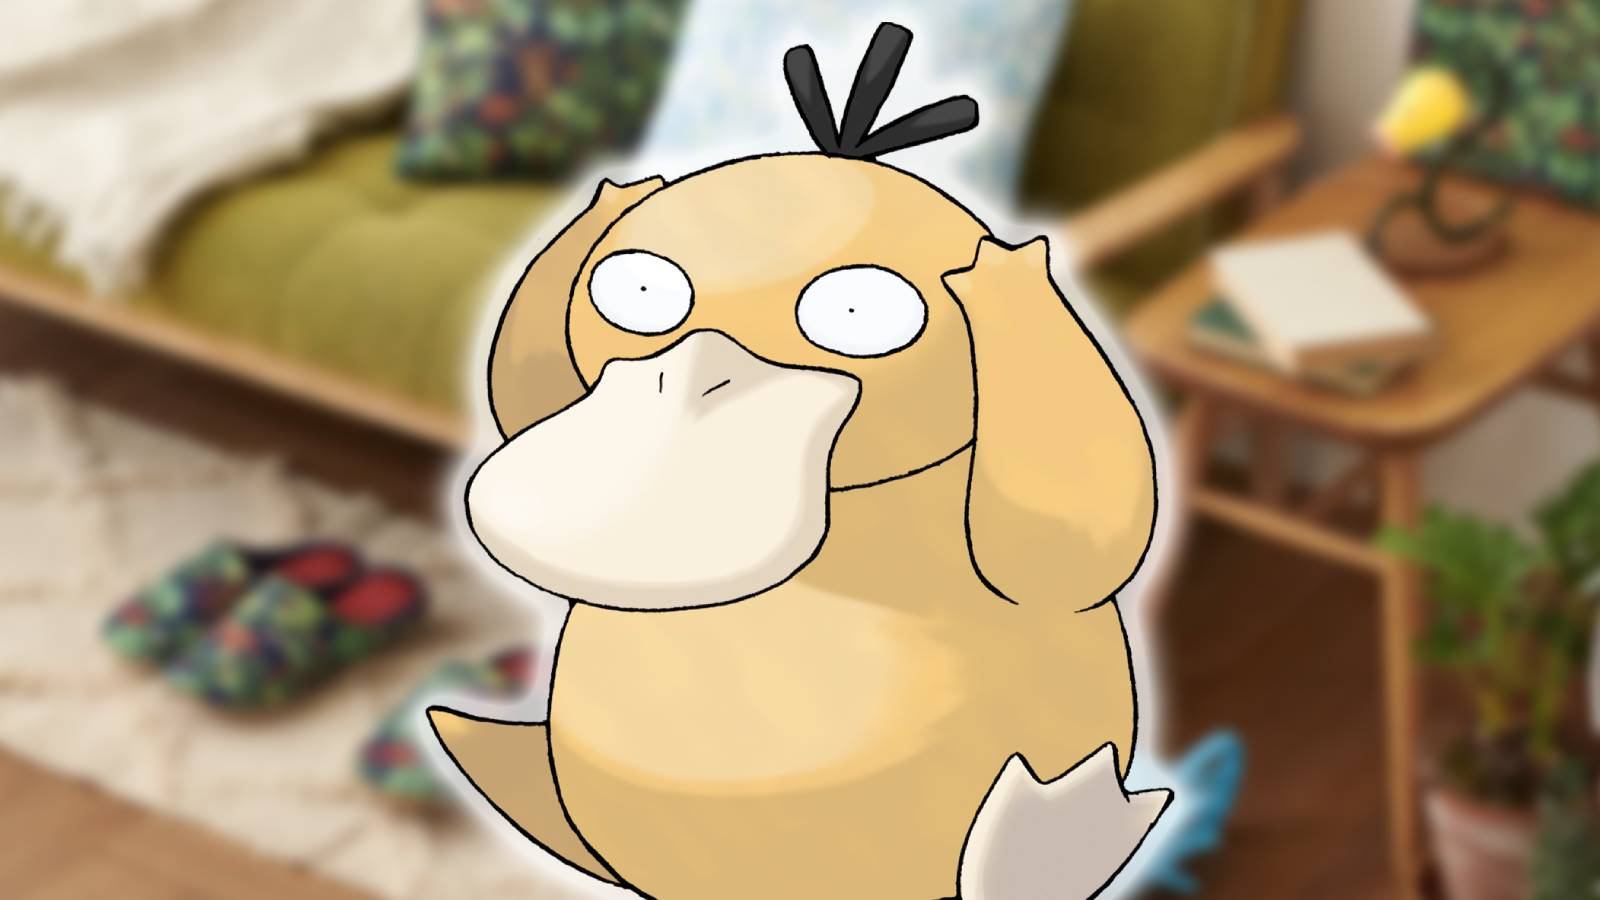 The foreground shows an image of Psyduck holding it's head, while the background displays a bluured image of Pokemon Concierge merchandise